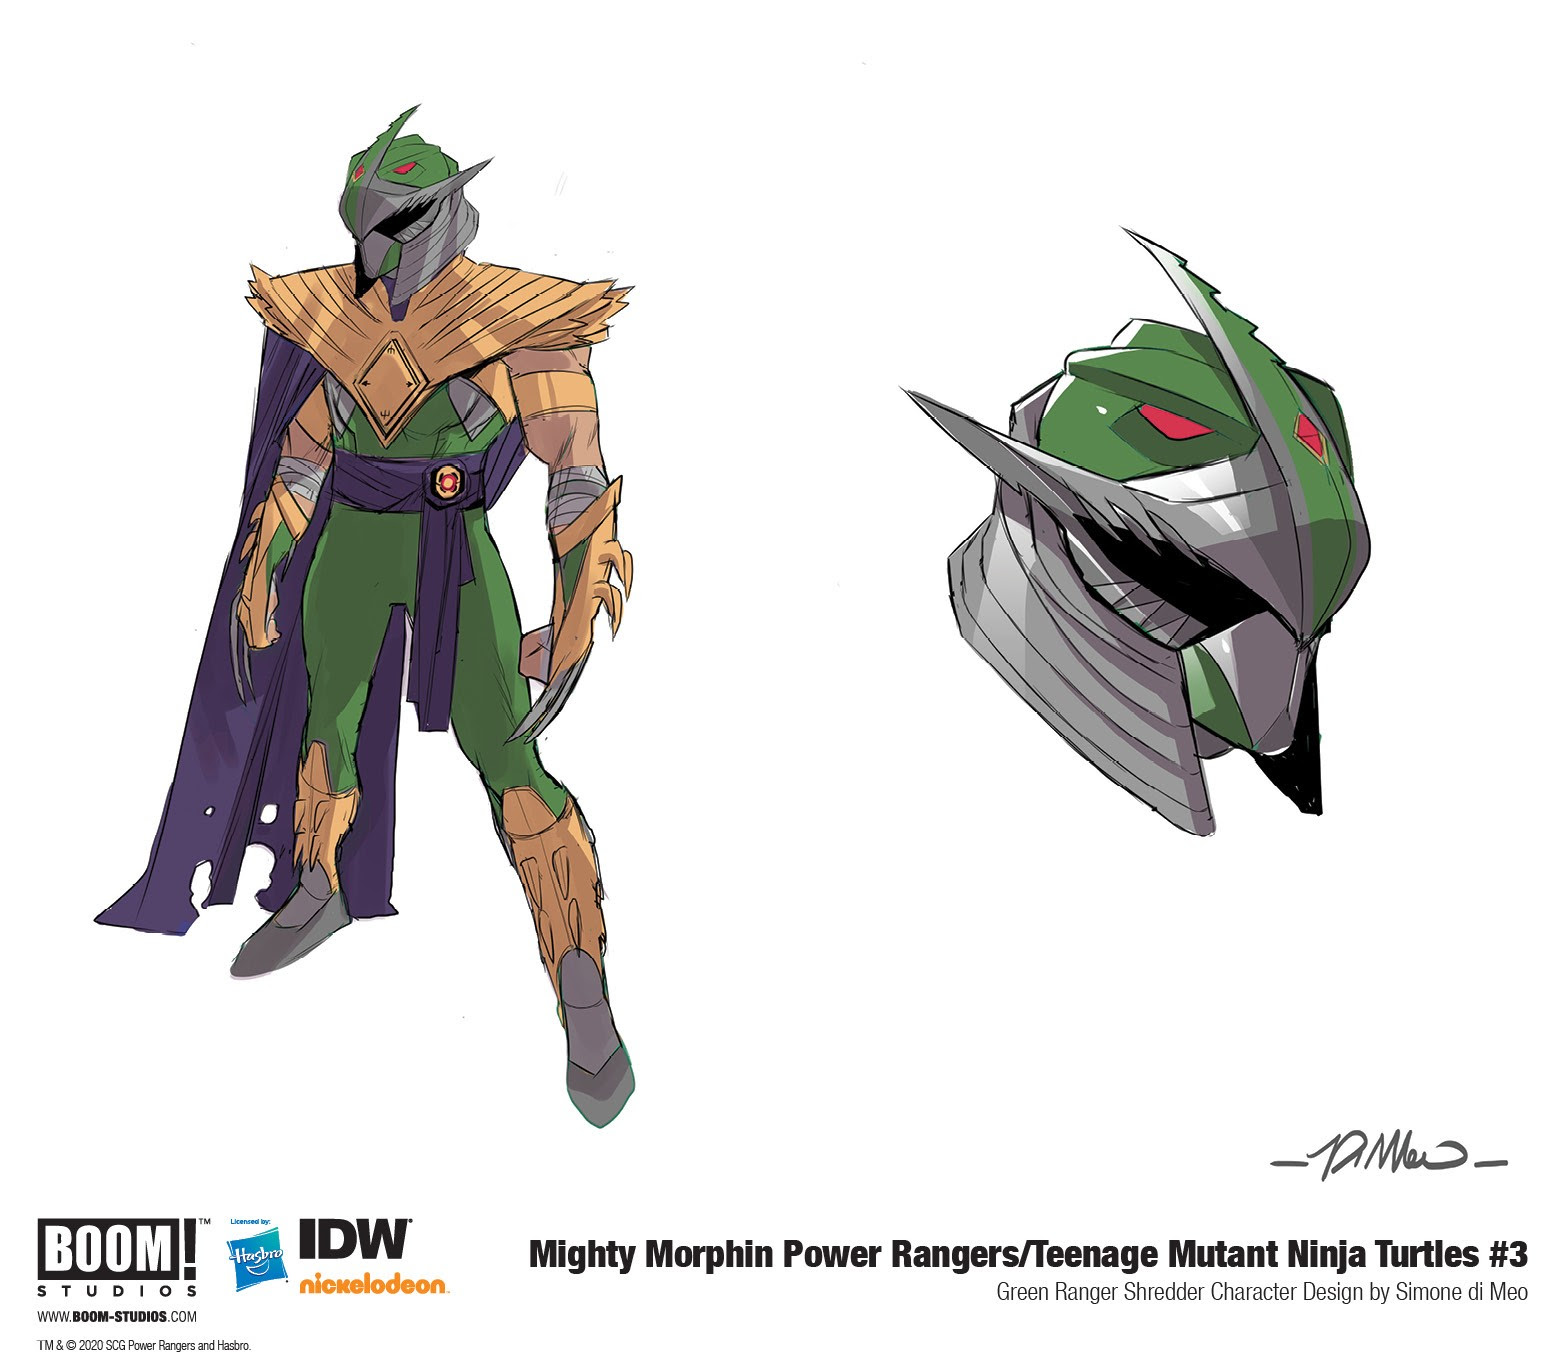 Say hello to the Green Ranger Shredder: the Power Rangers/Ninja Turtles supervillain you didn't know you needed